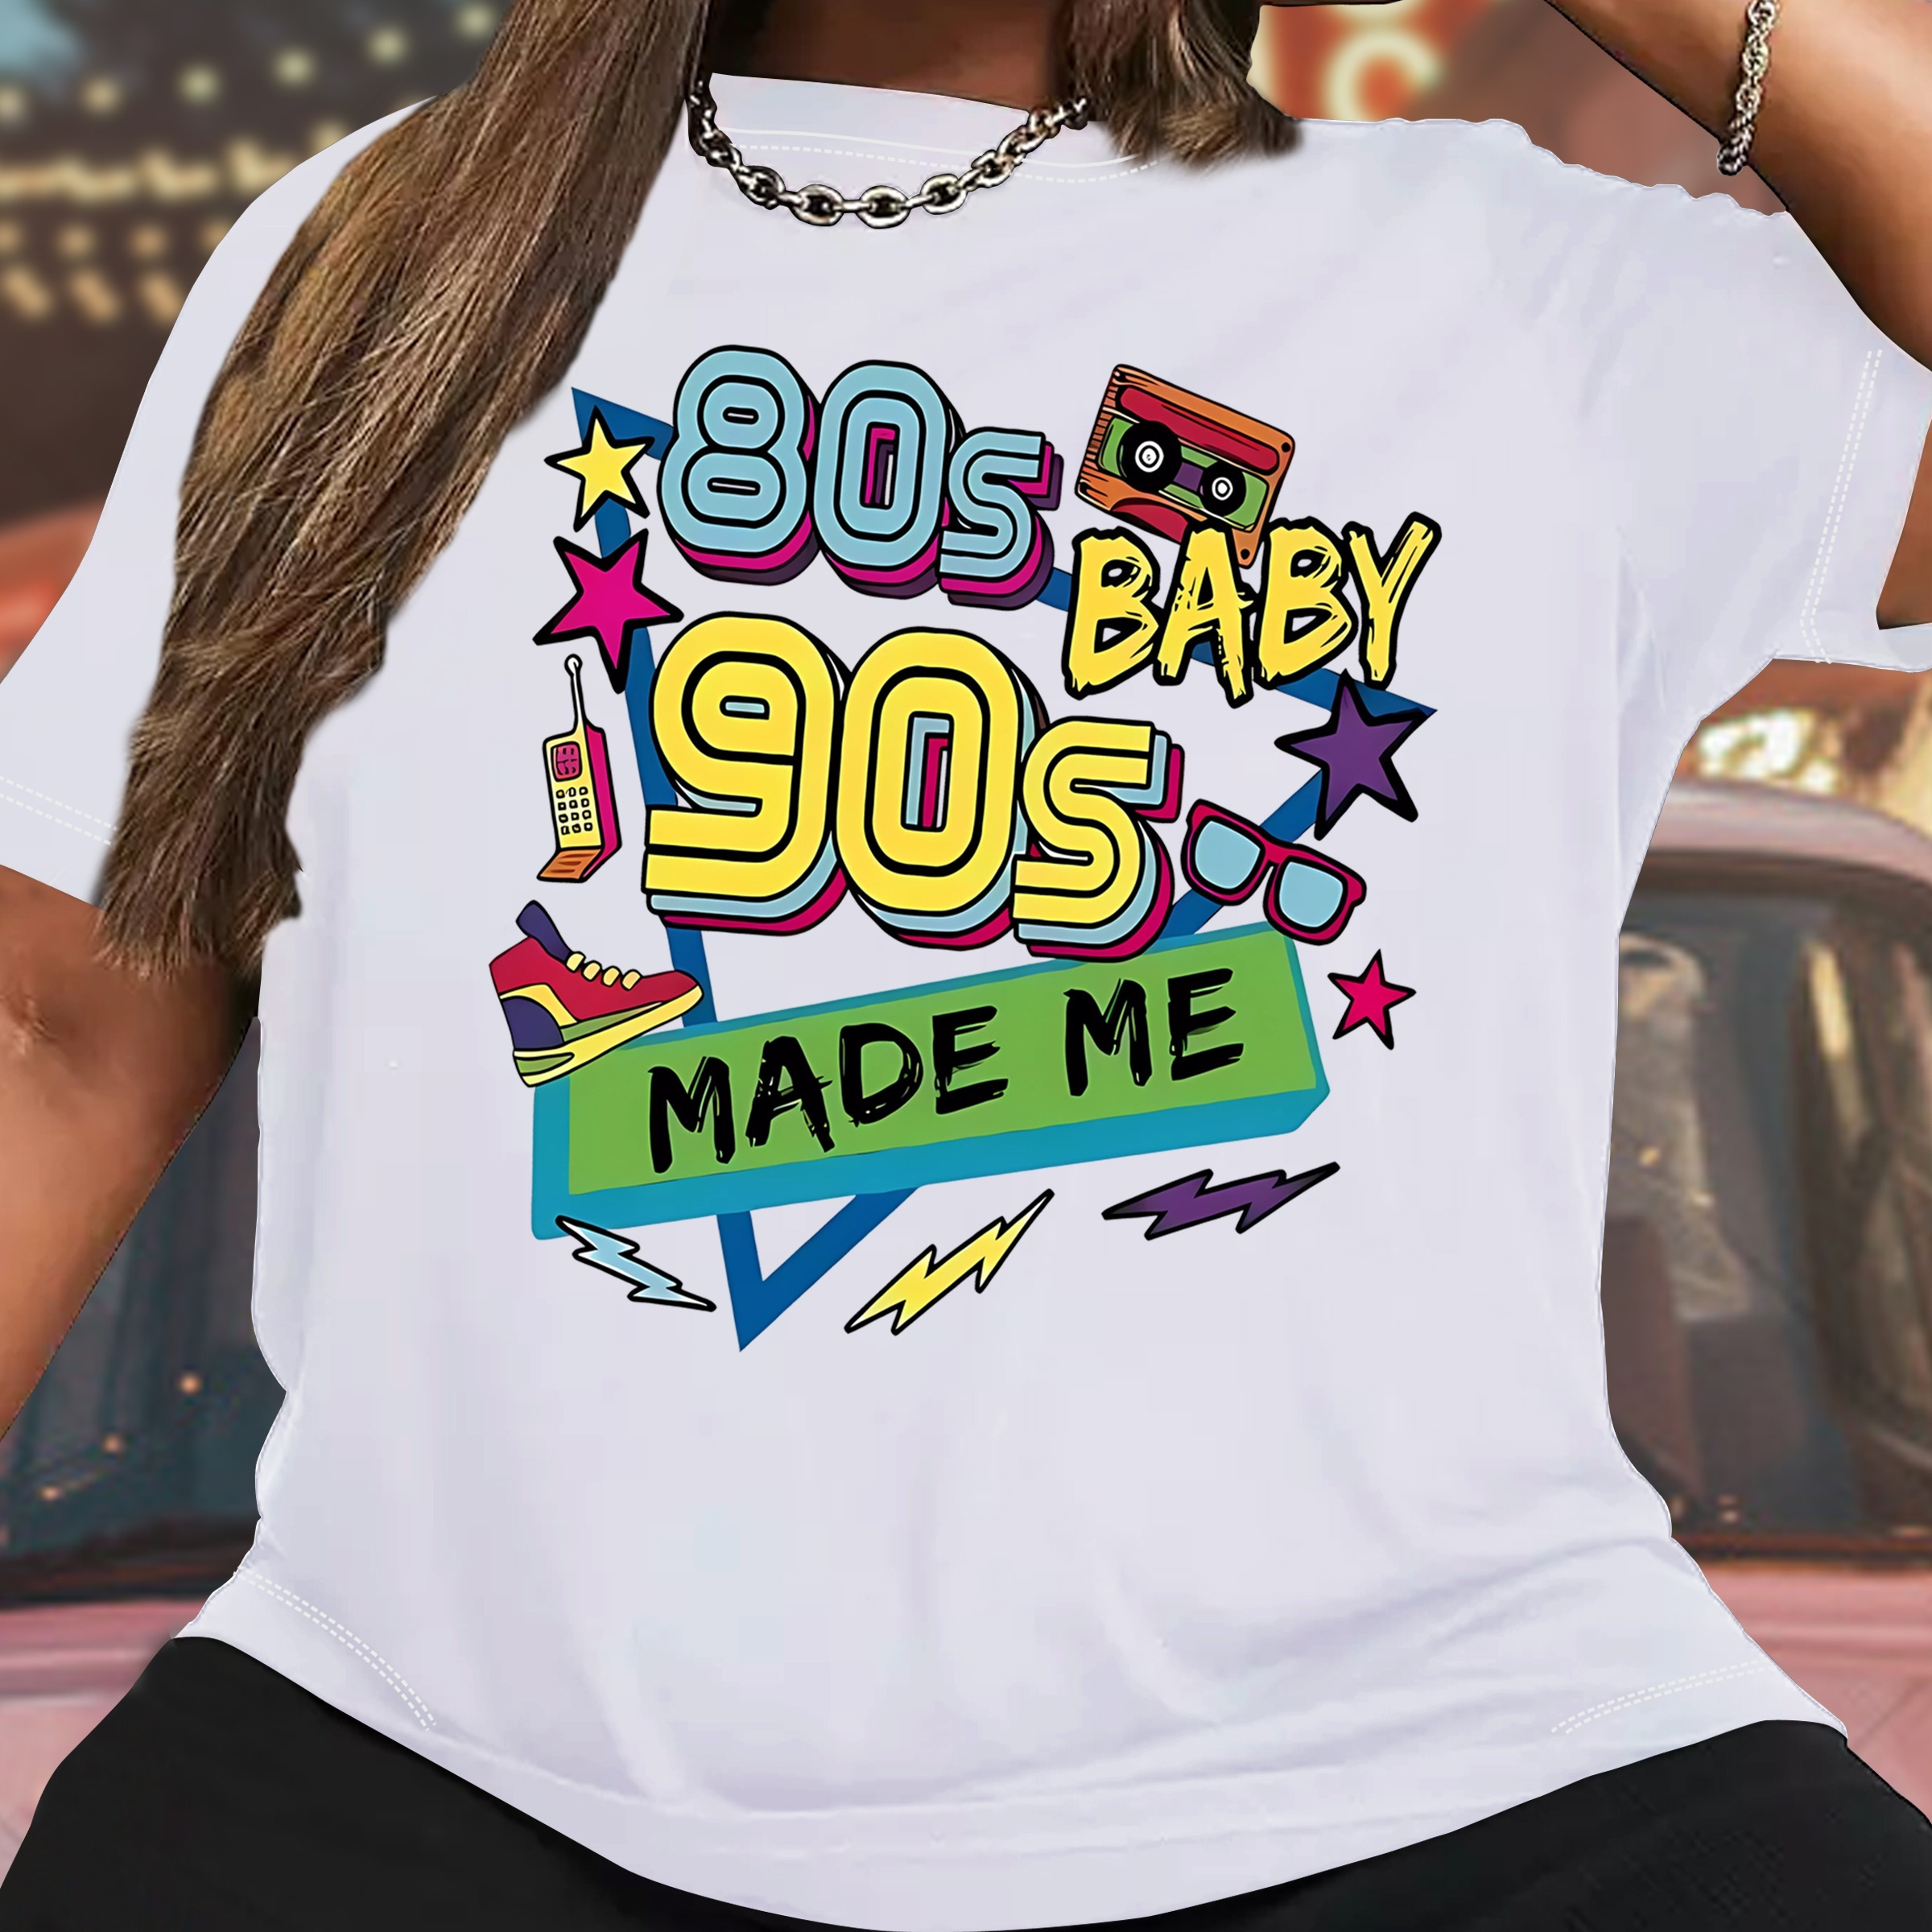 

Retro 80s 90s Baby Made Me Graphic Tee, Plus Size Women's Fashion Casual Sporty Short Sleeve T-shirt With Colorful Number Print, Relaxed Fit Top